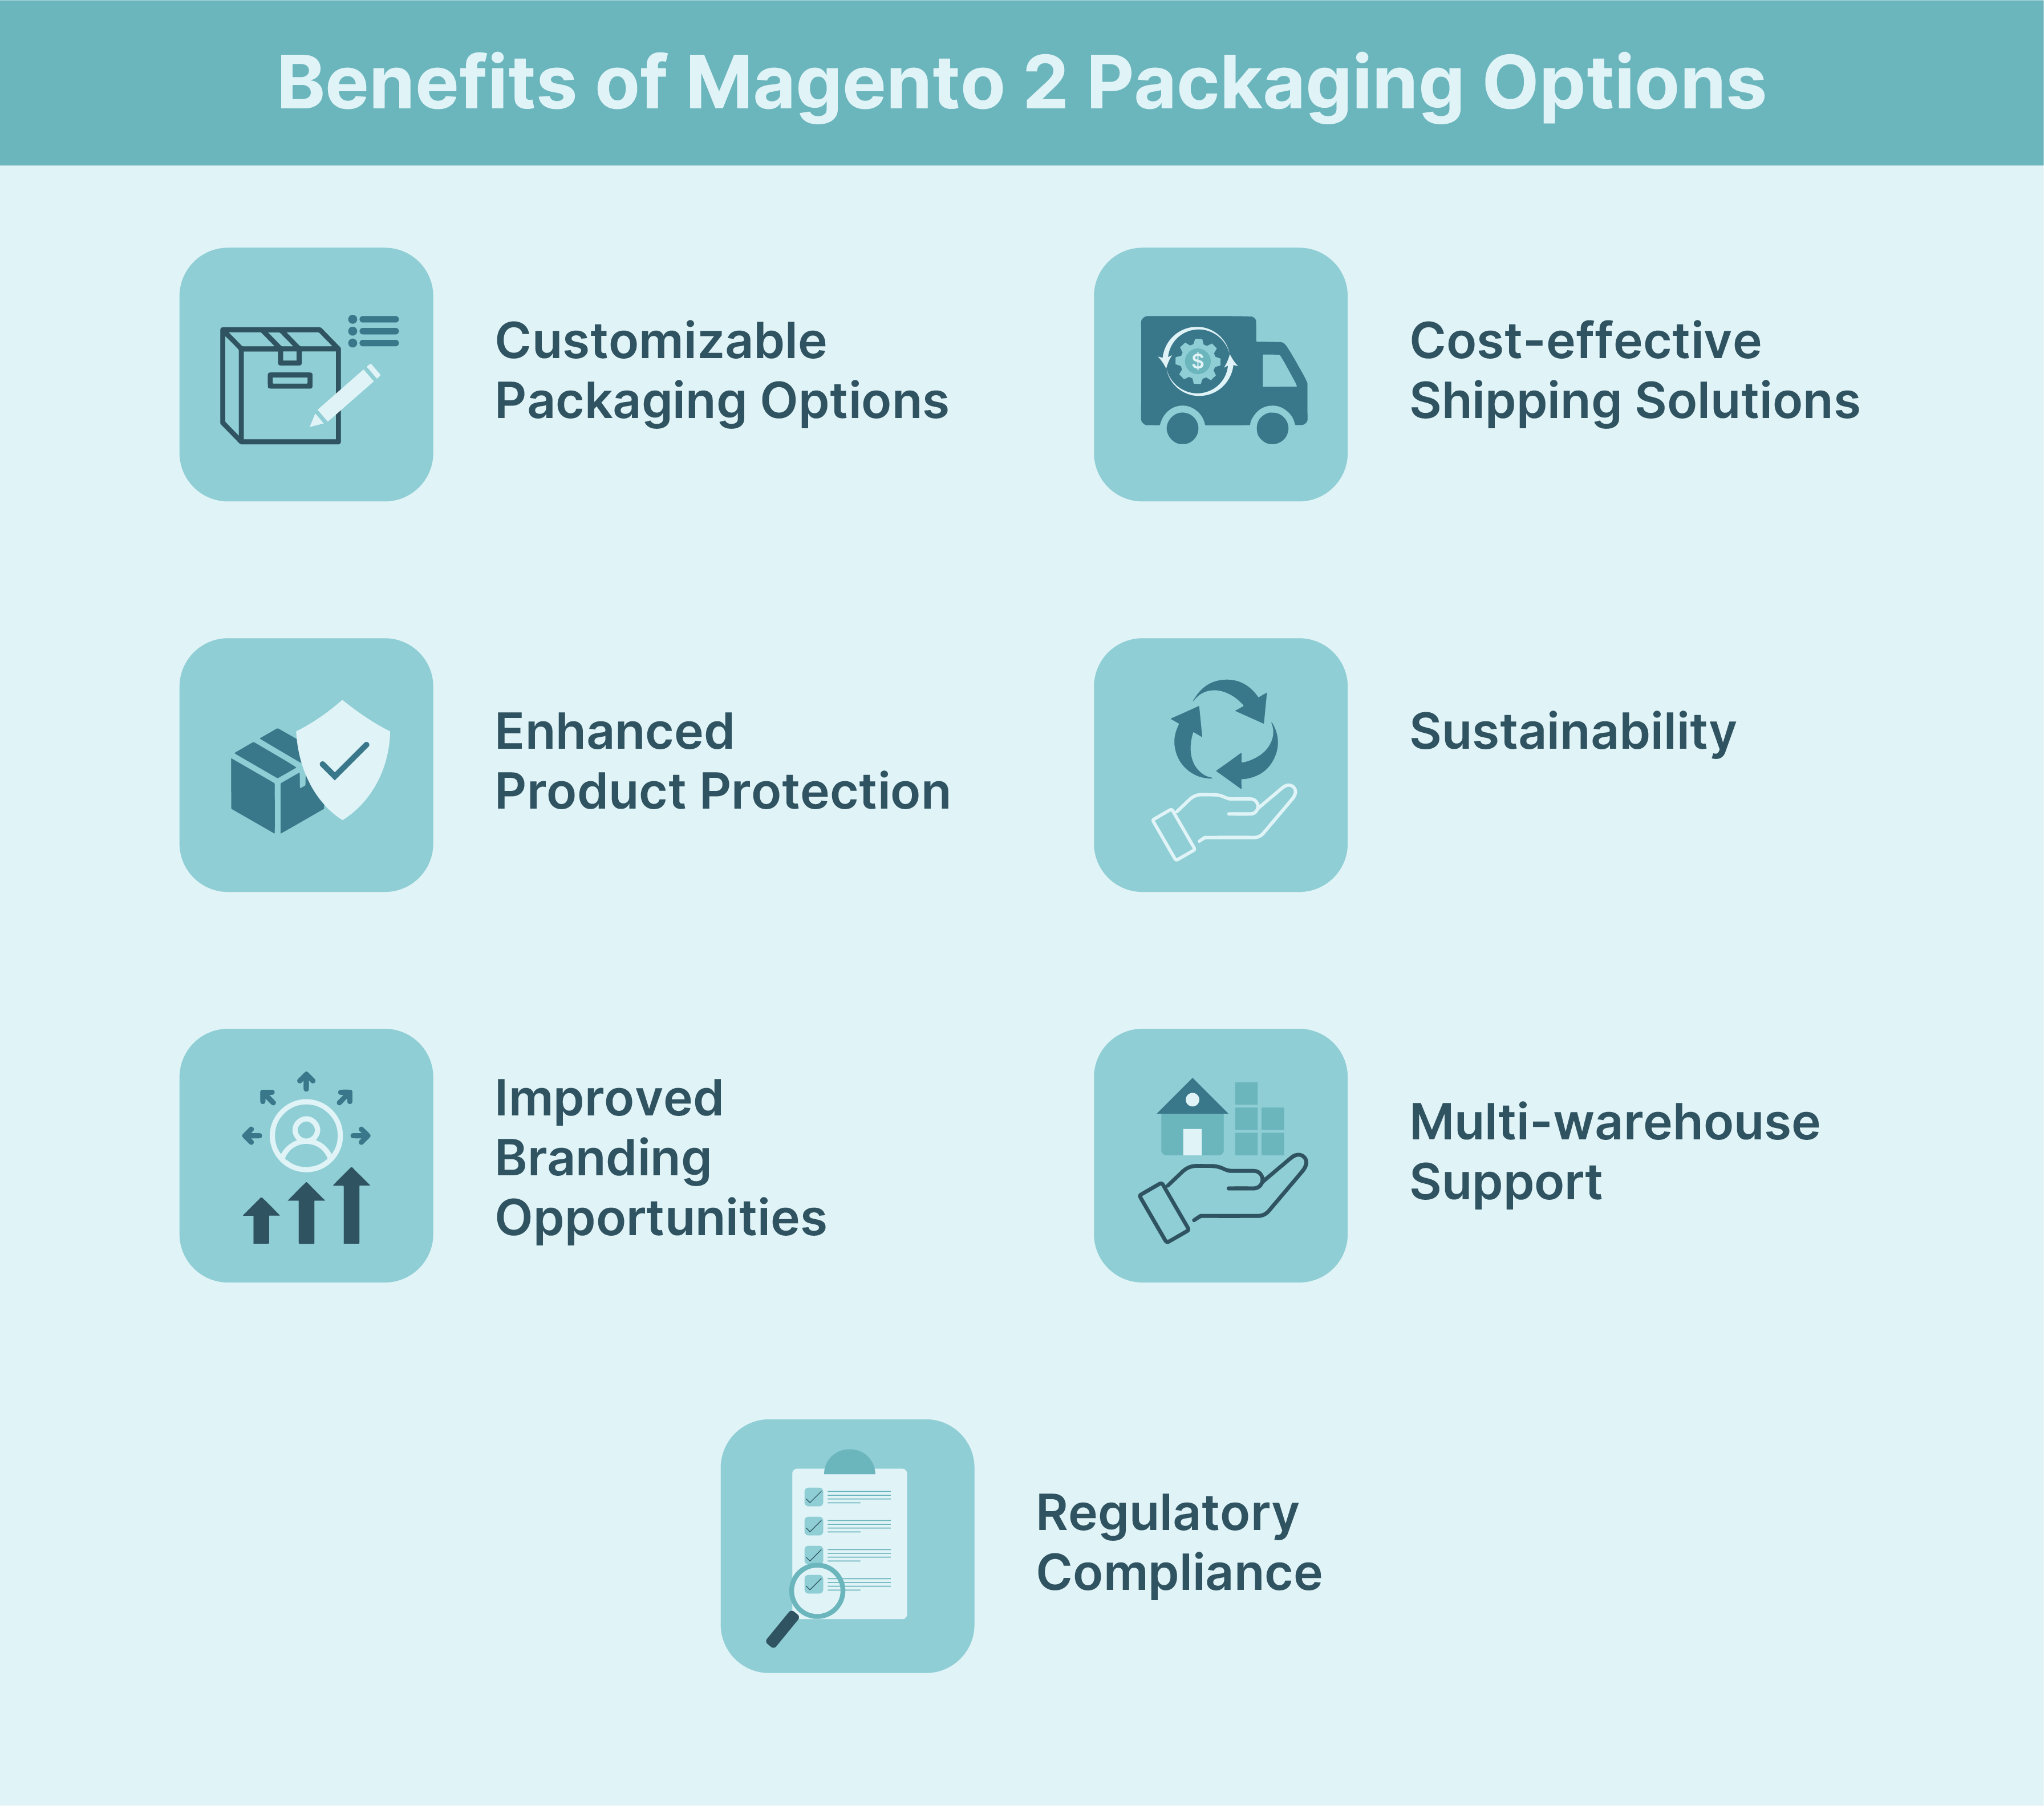 Benefits of Magento 2 packaging option